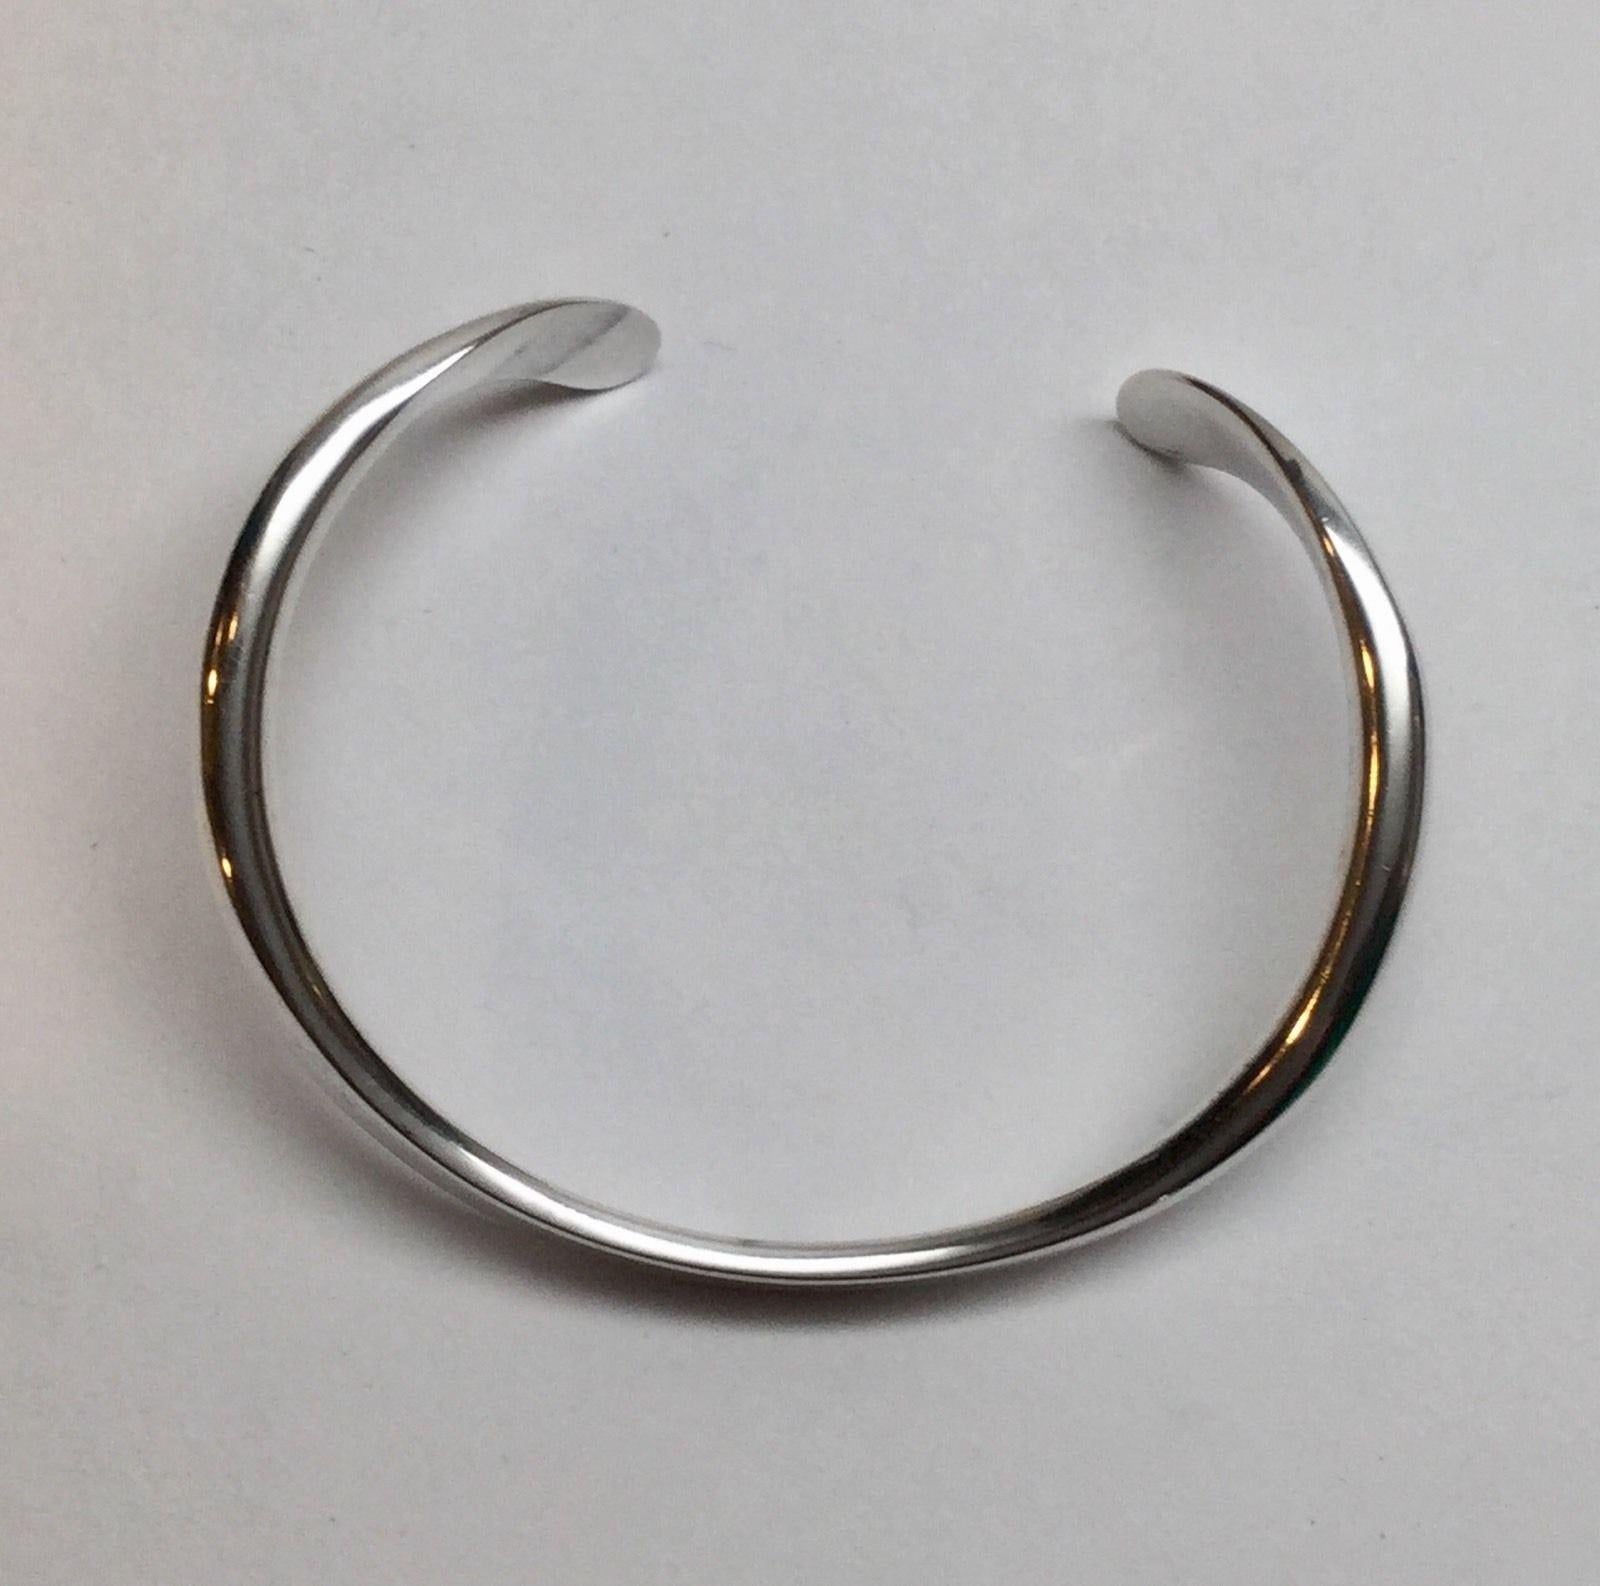 Vintage Age Fausing Denmark sterling silver modernist curved cuff bracelet.


Marked A with circle on top with two lines under in circle of STERLING DENMARK FAUSING.


Measures 6 1/4